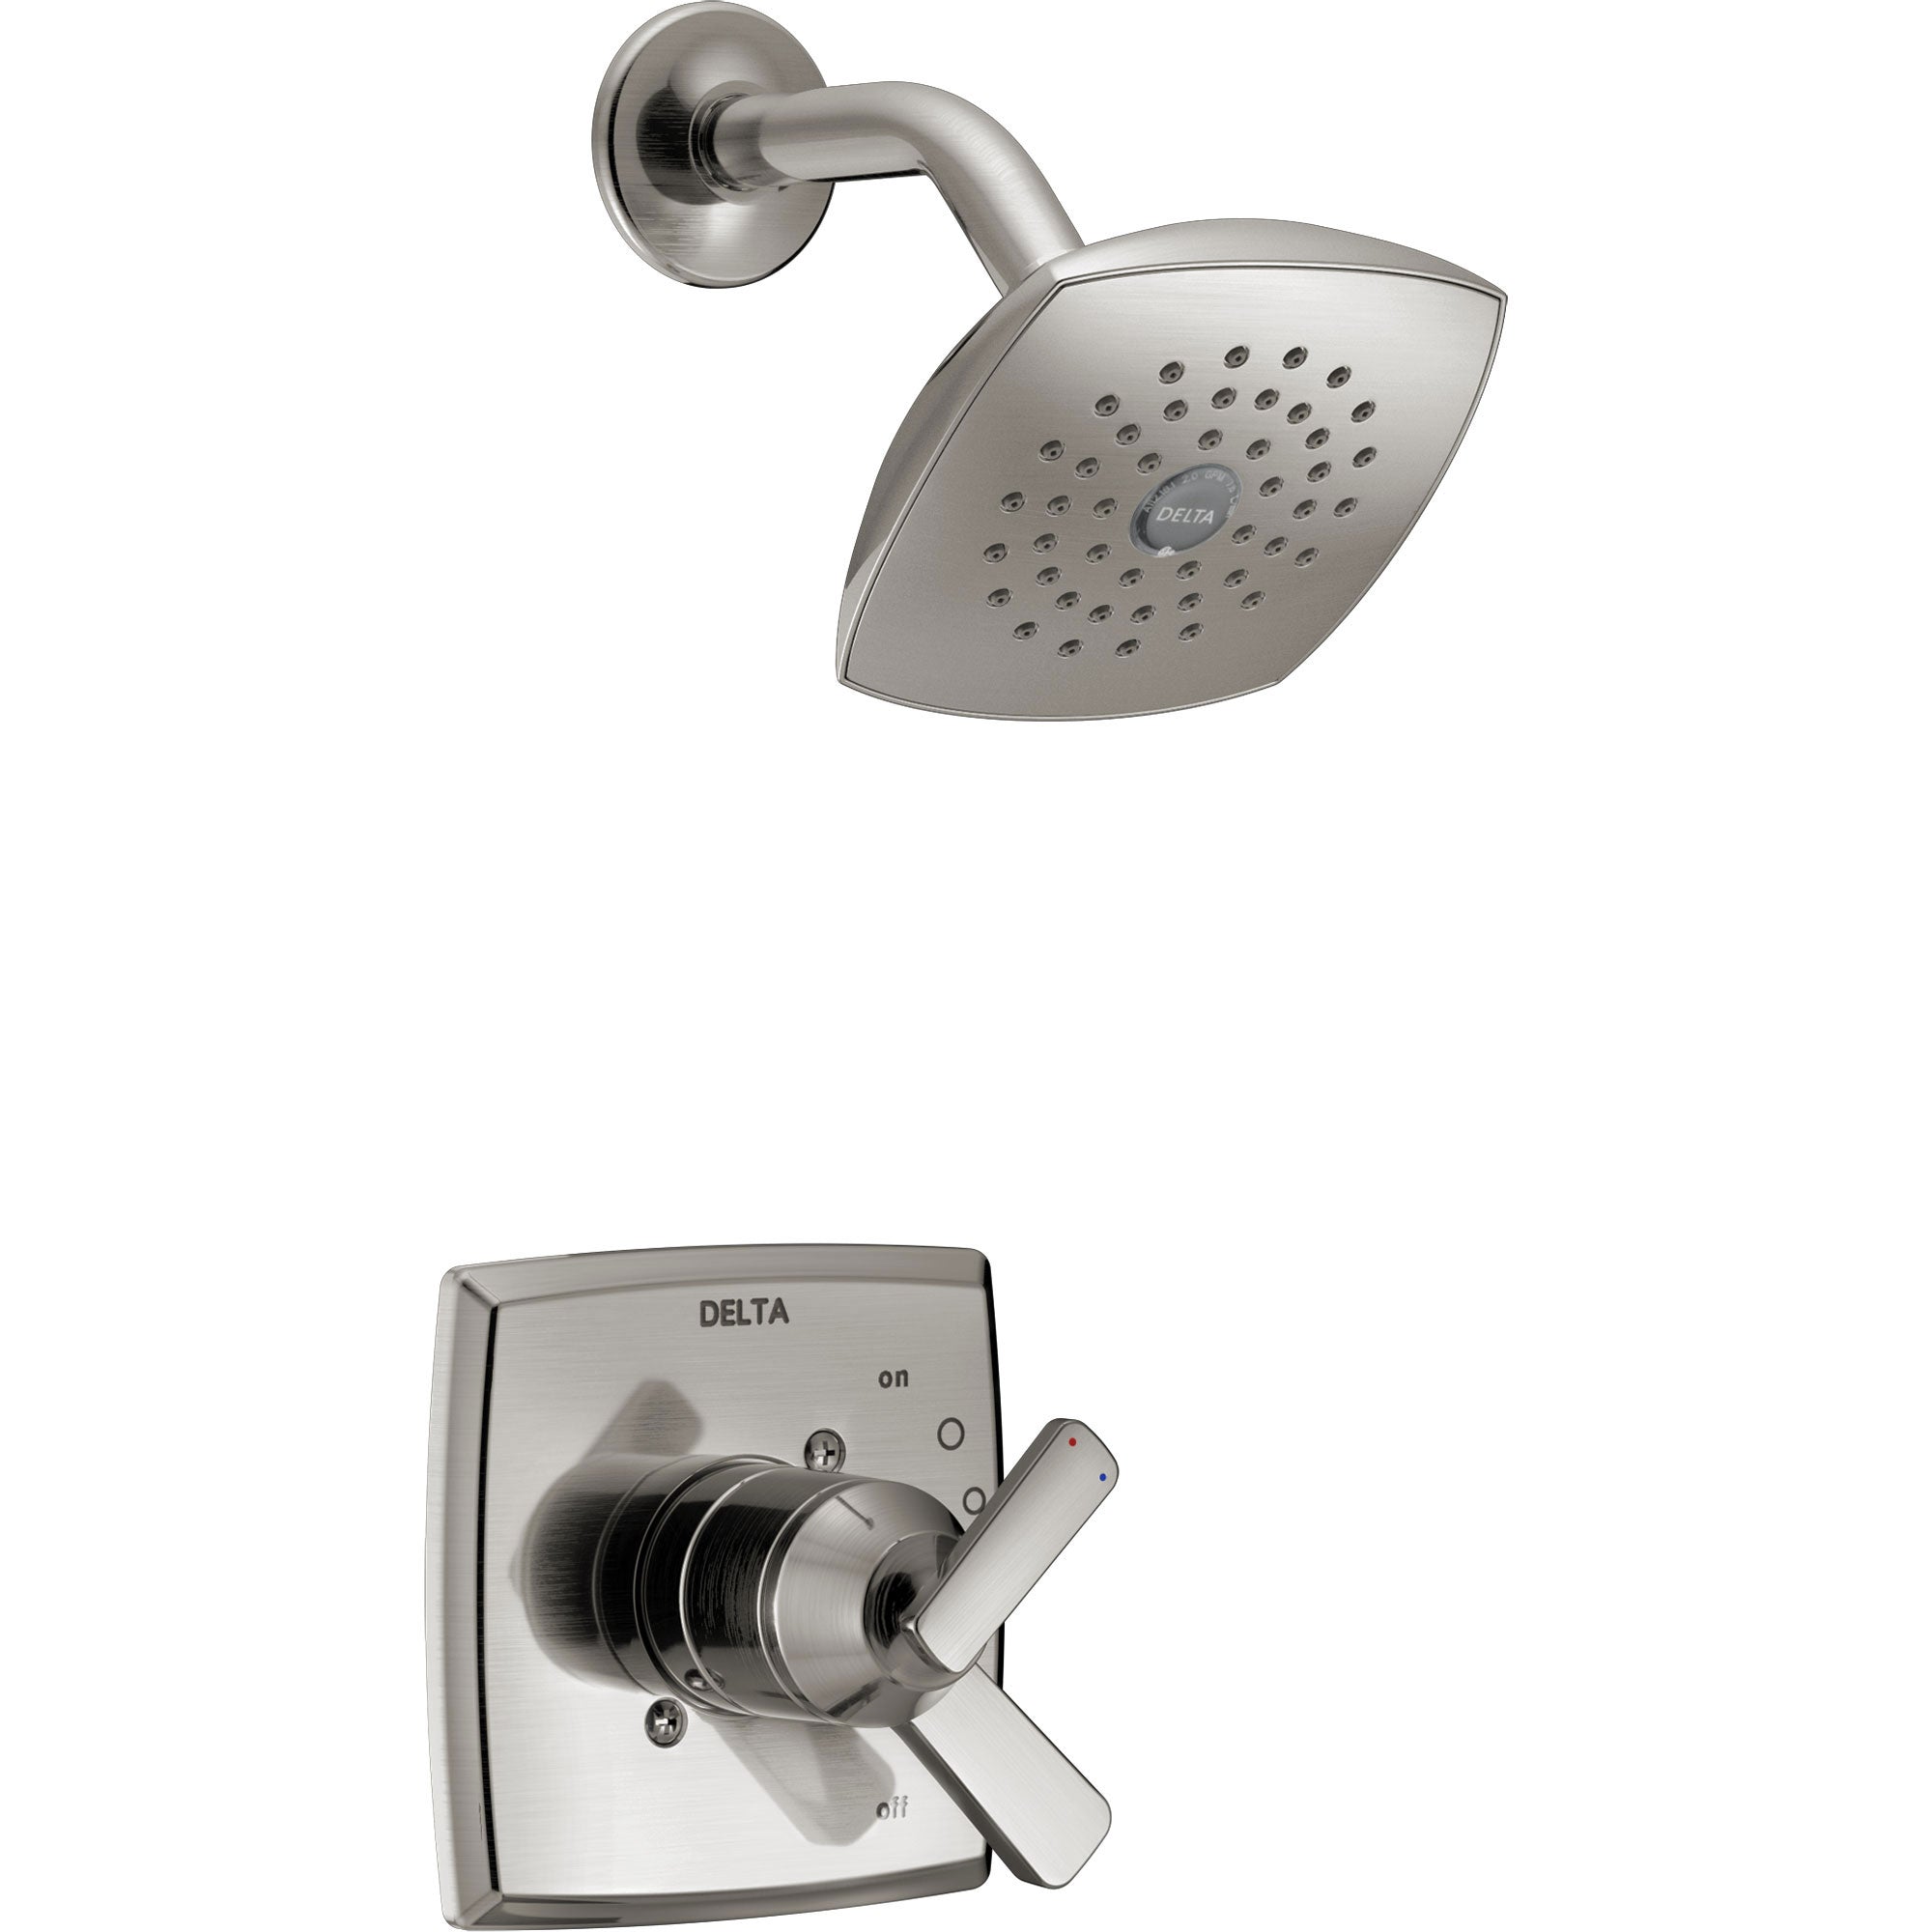 Delta Ashlyn Stainless Steel Finish Monitor 17 Series Shower Only Faucet with Dual Temperature and Pressure Control INCLUDES Rough-in Valve D1134V